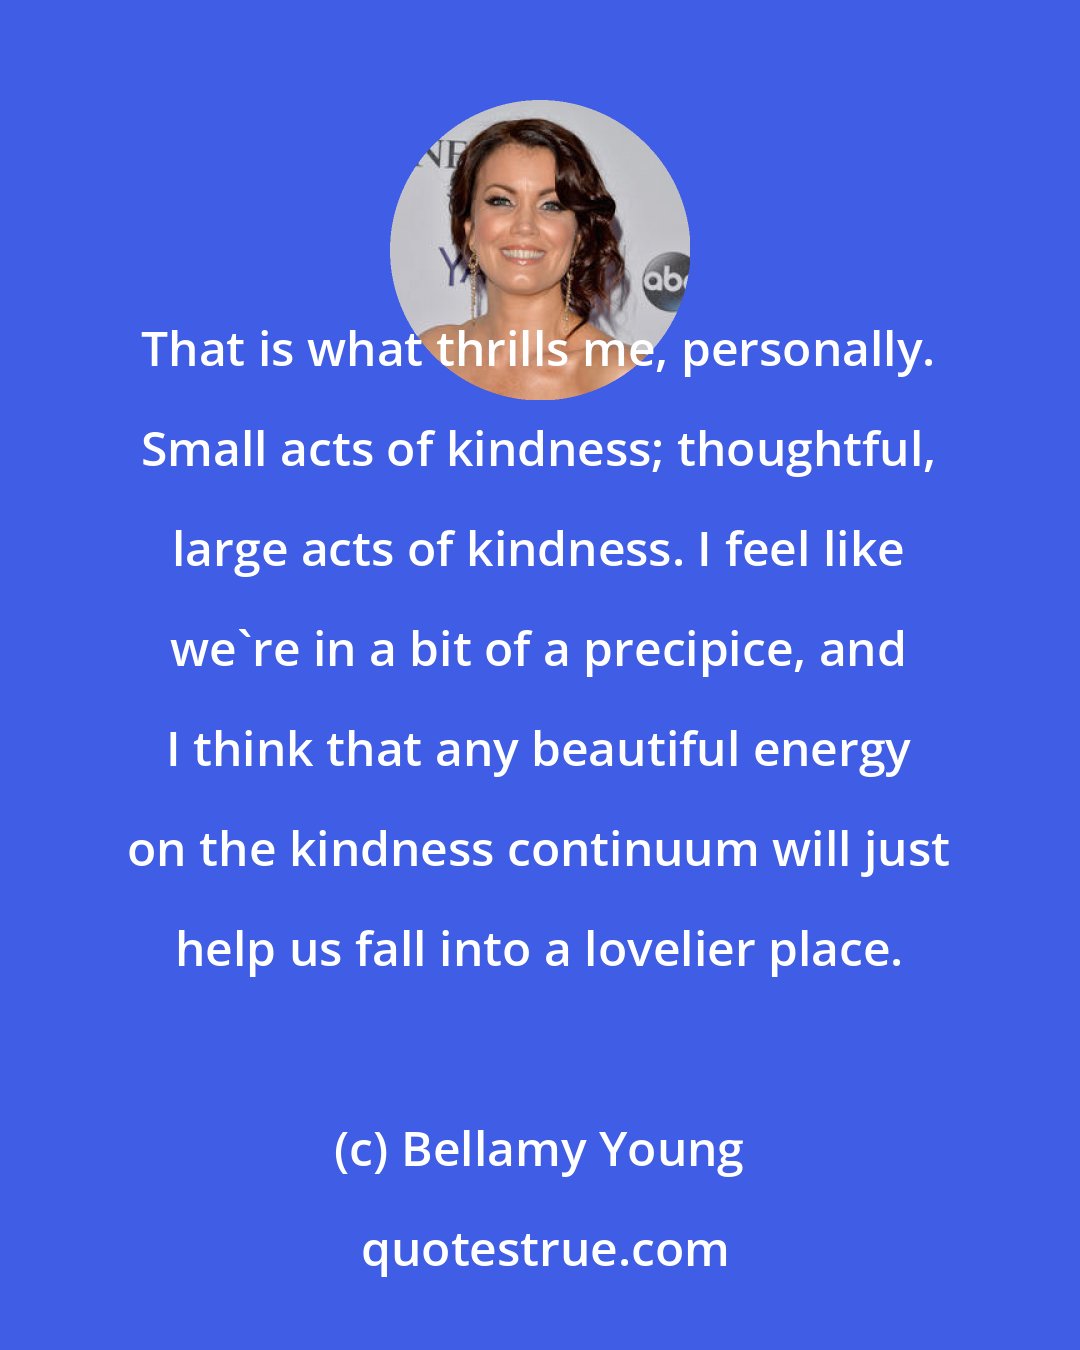 Bellamy Young: That is what thrills me, personally. Small acts of kindness; thoughtful, large acts of kindness. I feel like we're in a bit of a precipice, and I think that any beautiful energy on the kindness continuum will just help us fall into a lovelier place.